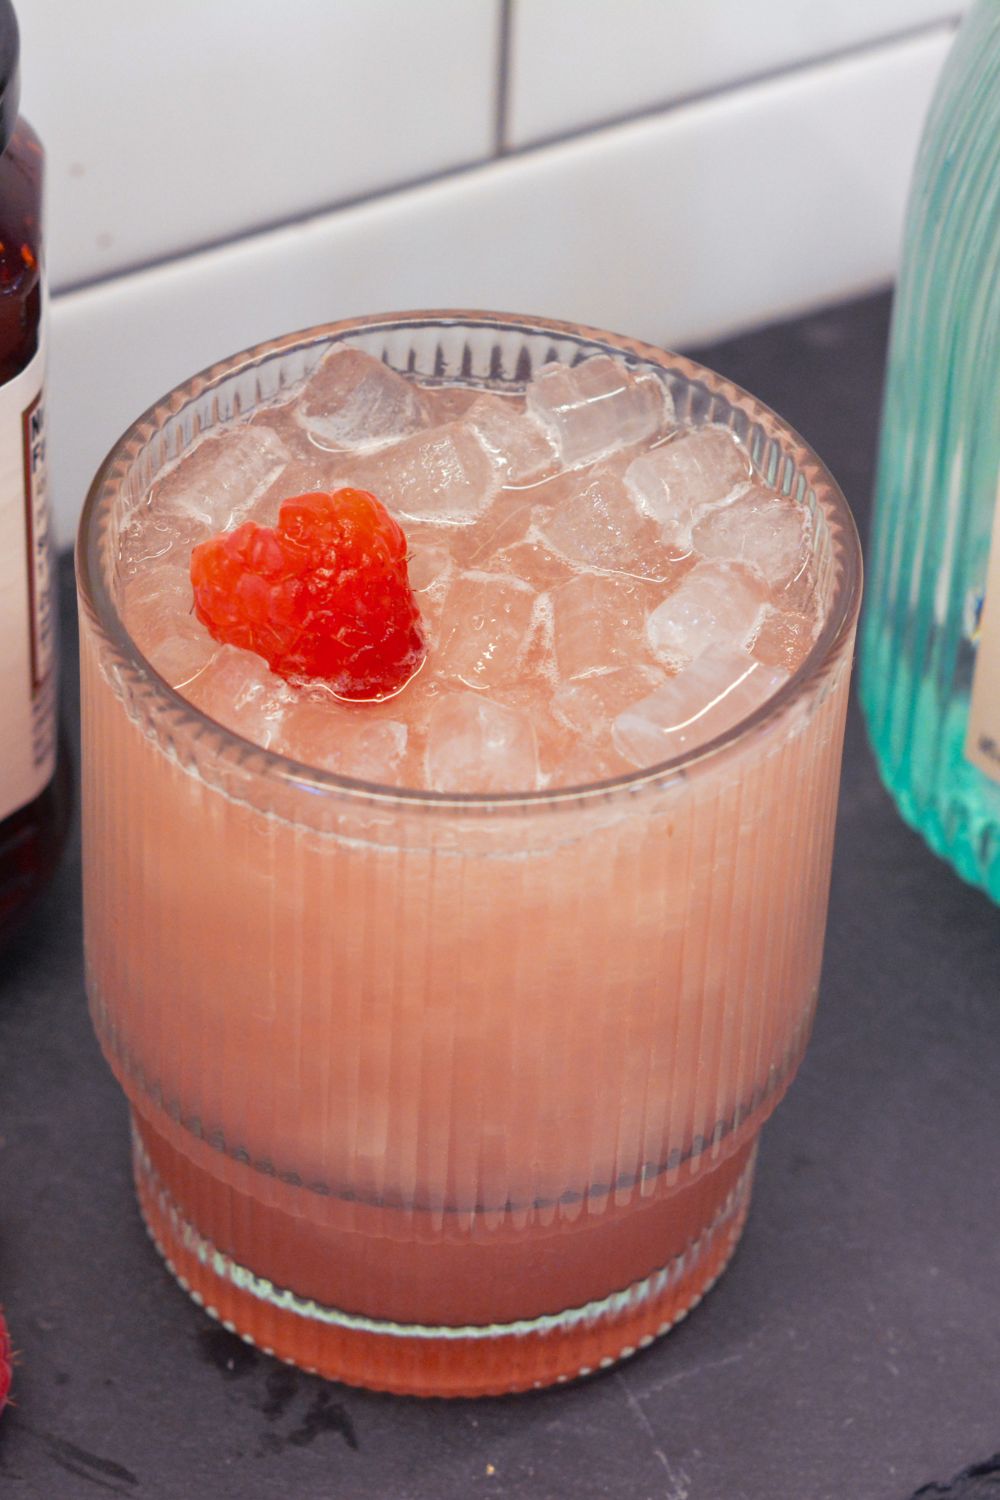  A fruity gin cocktail is this raspberry gin and jamp cocktail so easy to make with the help of the raspberry jam and is married with the citrus-forward gin with the help of some lemon juice.